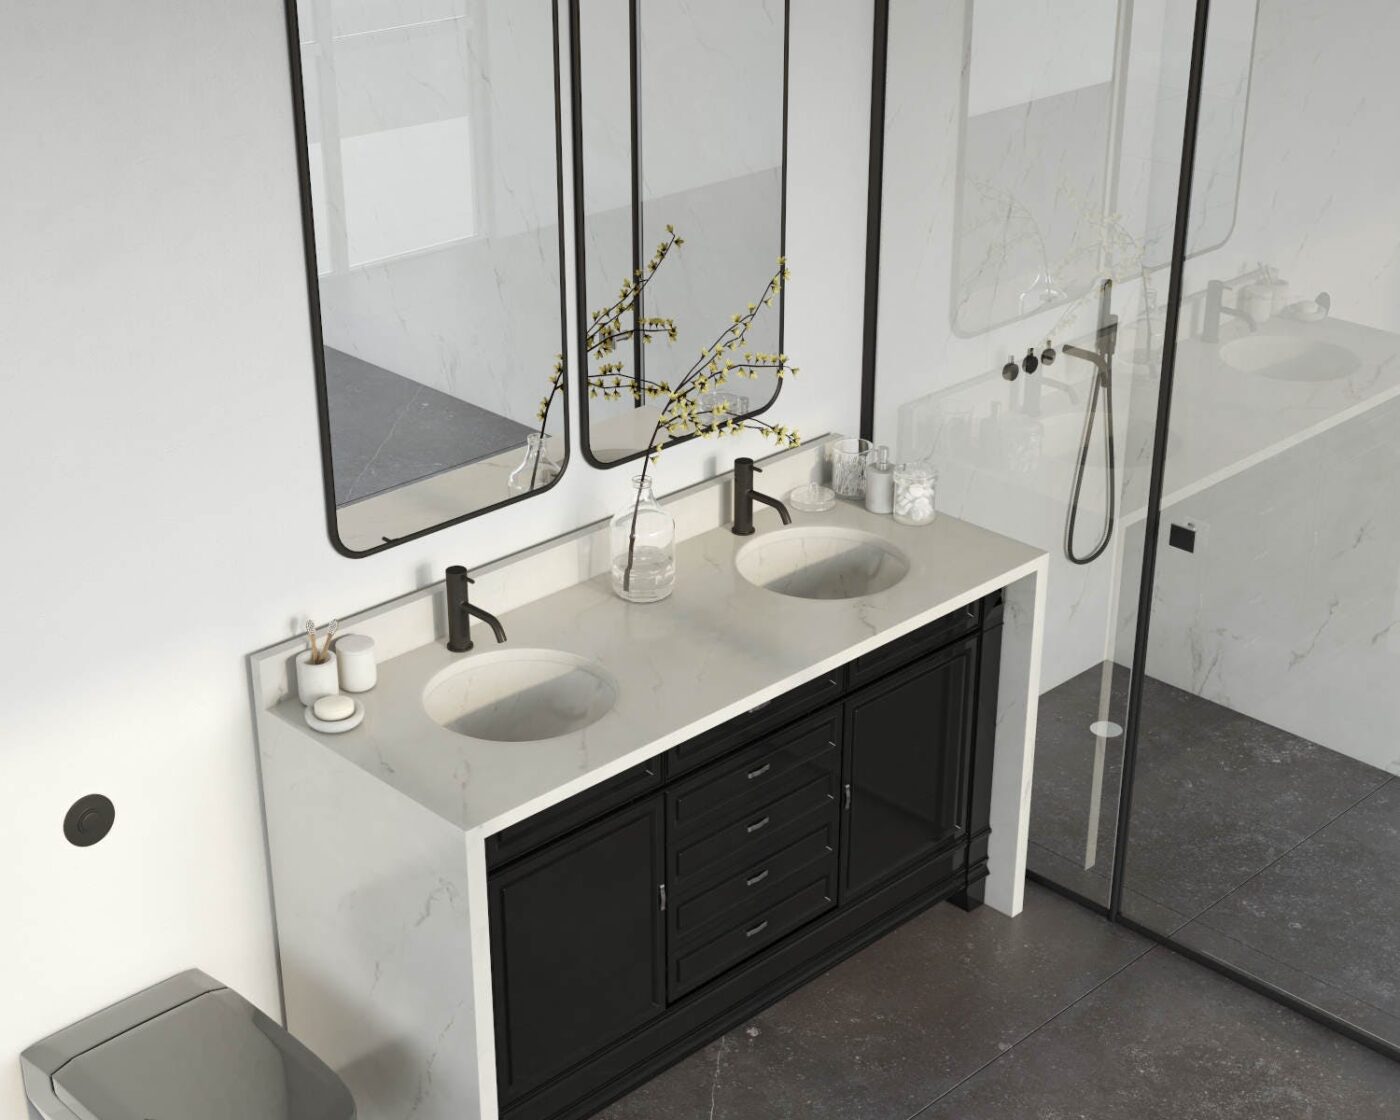 Image of Tundra 19 Bathroom.RGB color 1 in Small bathrooms: the great secrets of their design - Cosentino